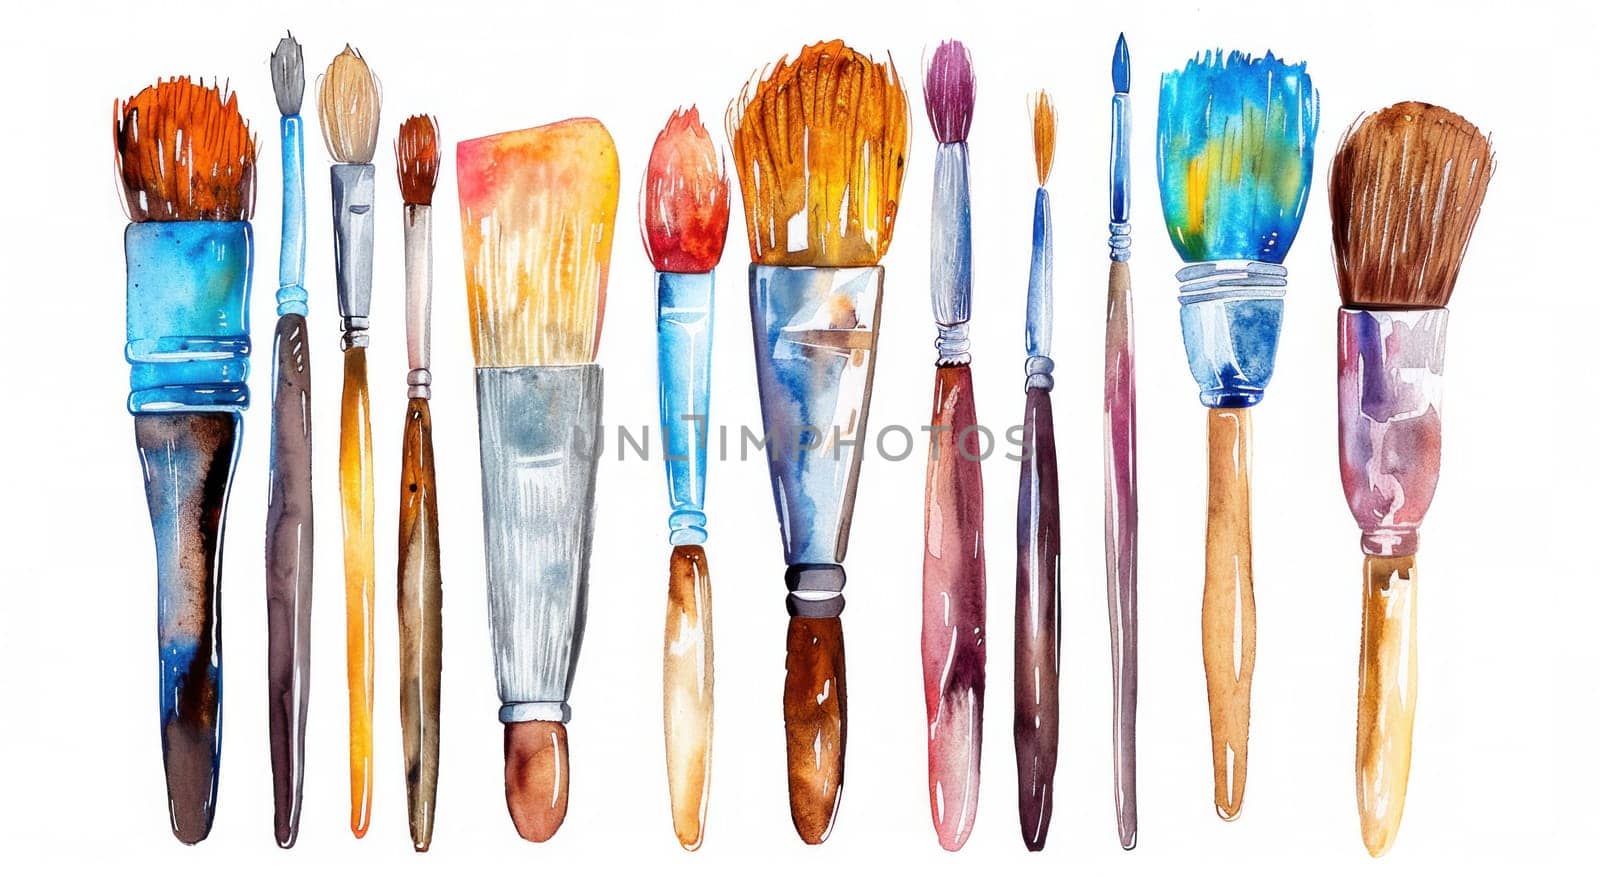 Watercolor art brushes set for painting and illustration, creative tools for artists and hobbyists by Vichizh